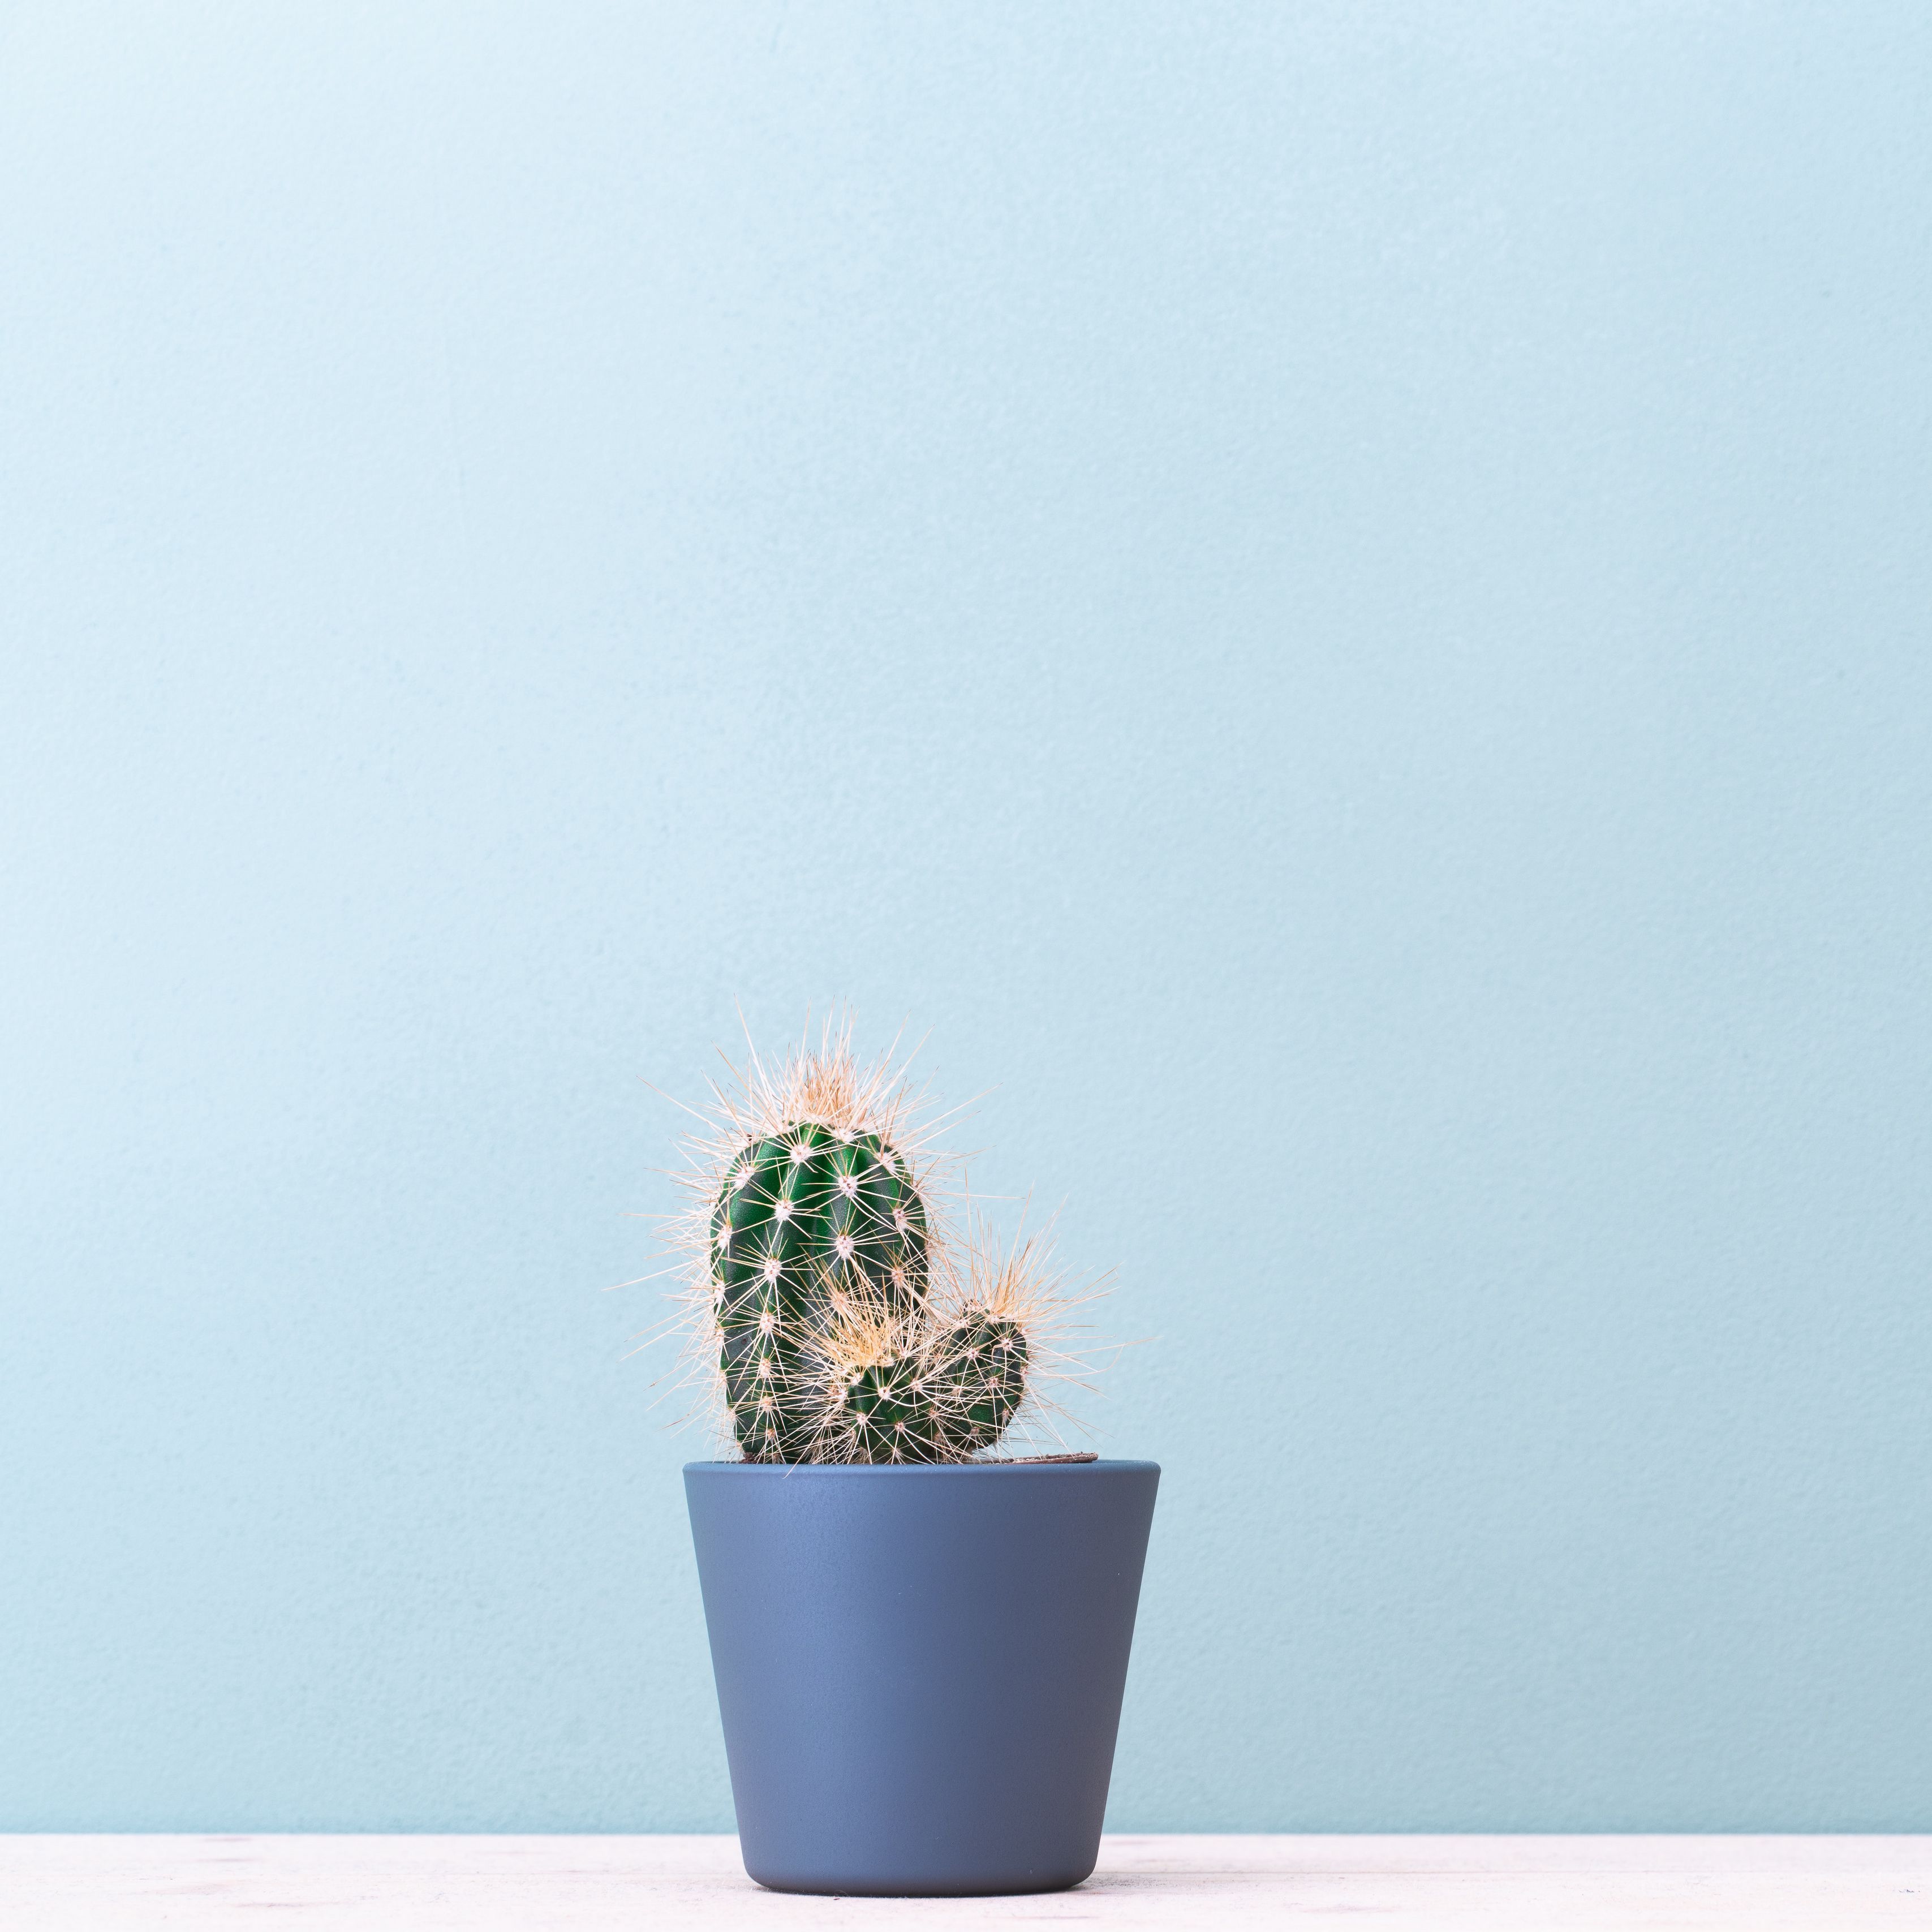 A small cactus plant in blue pot - Cactus